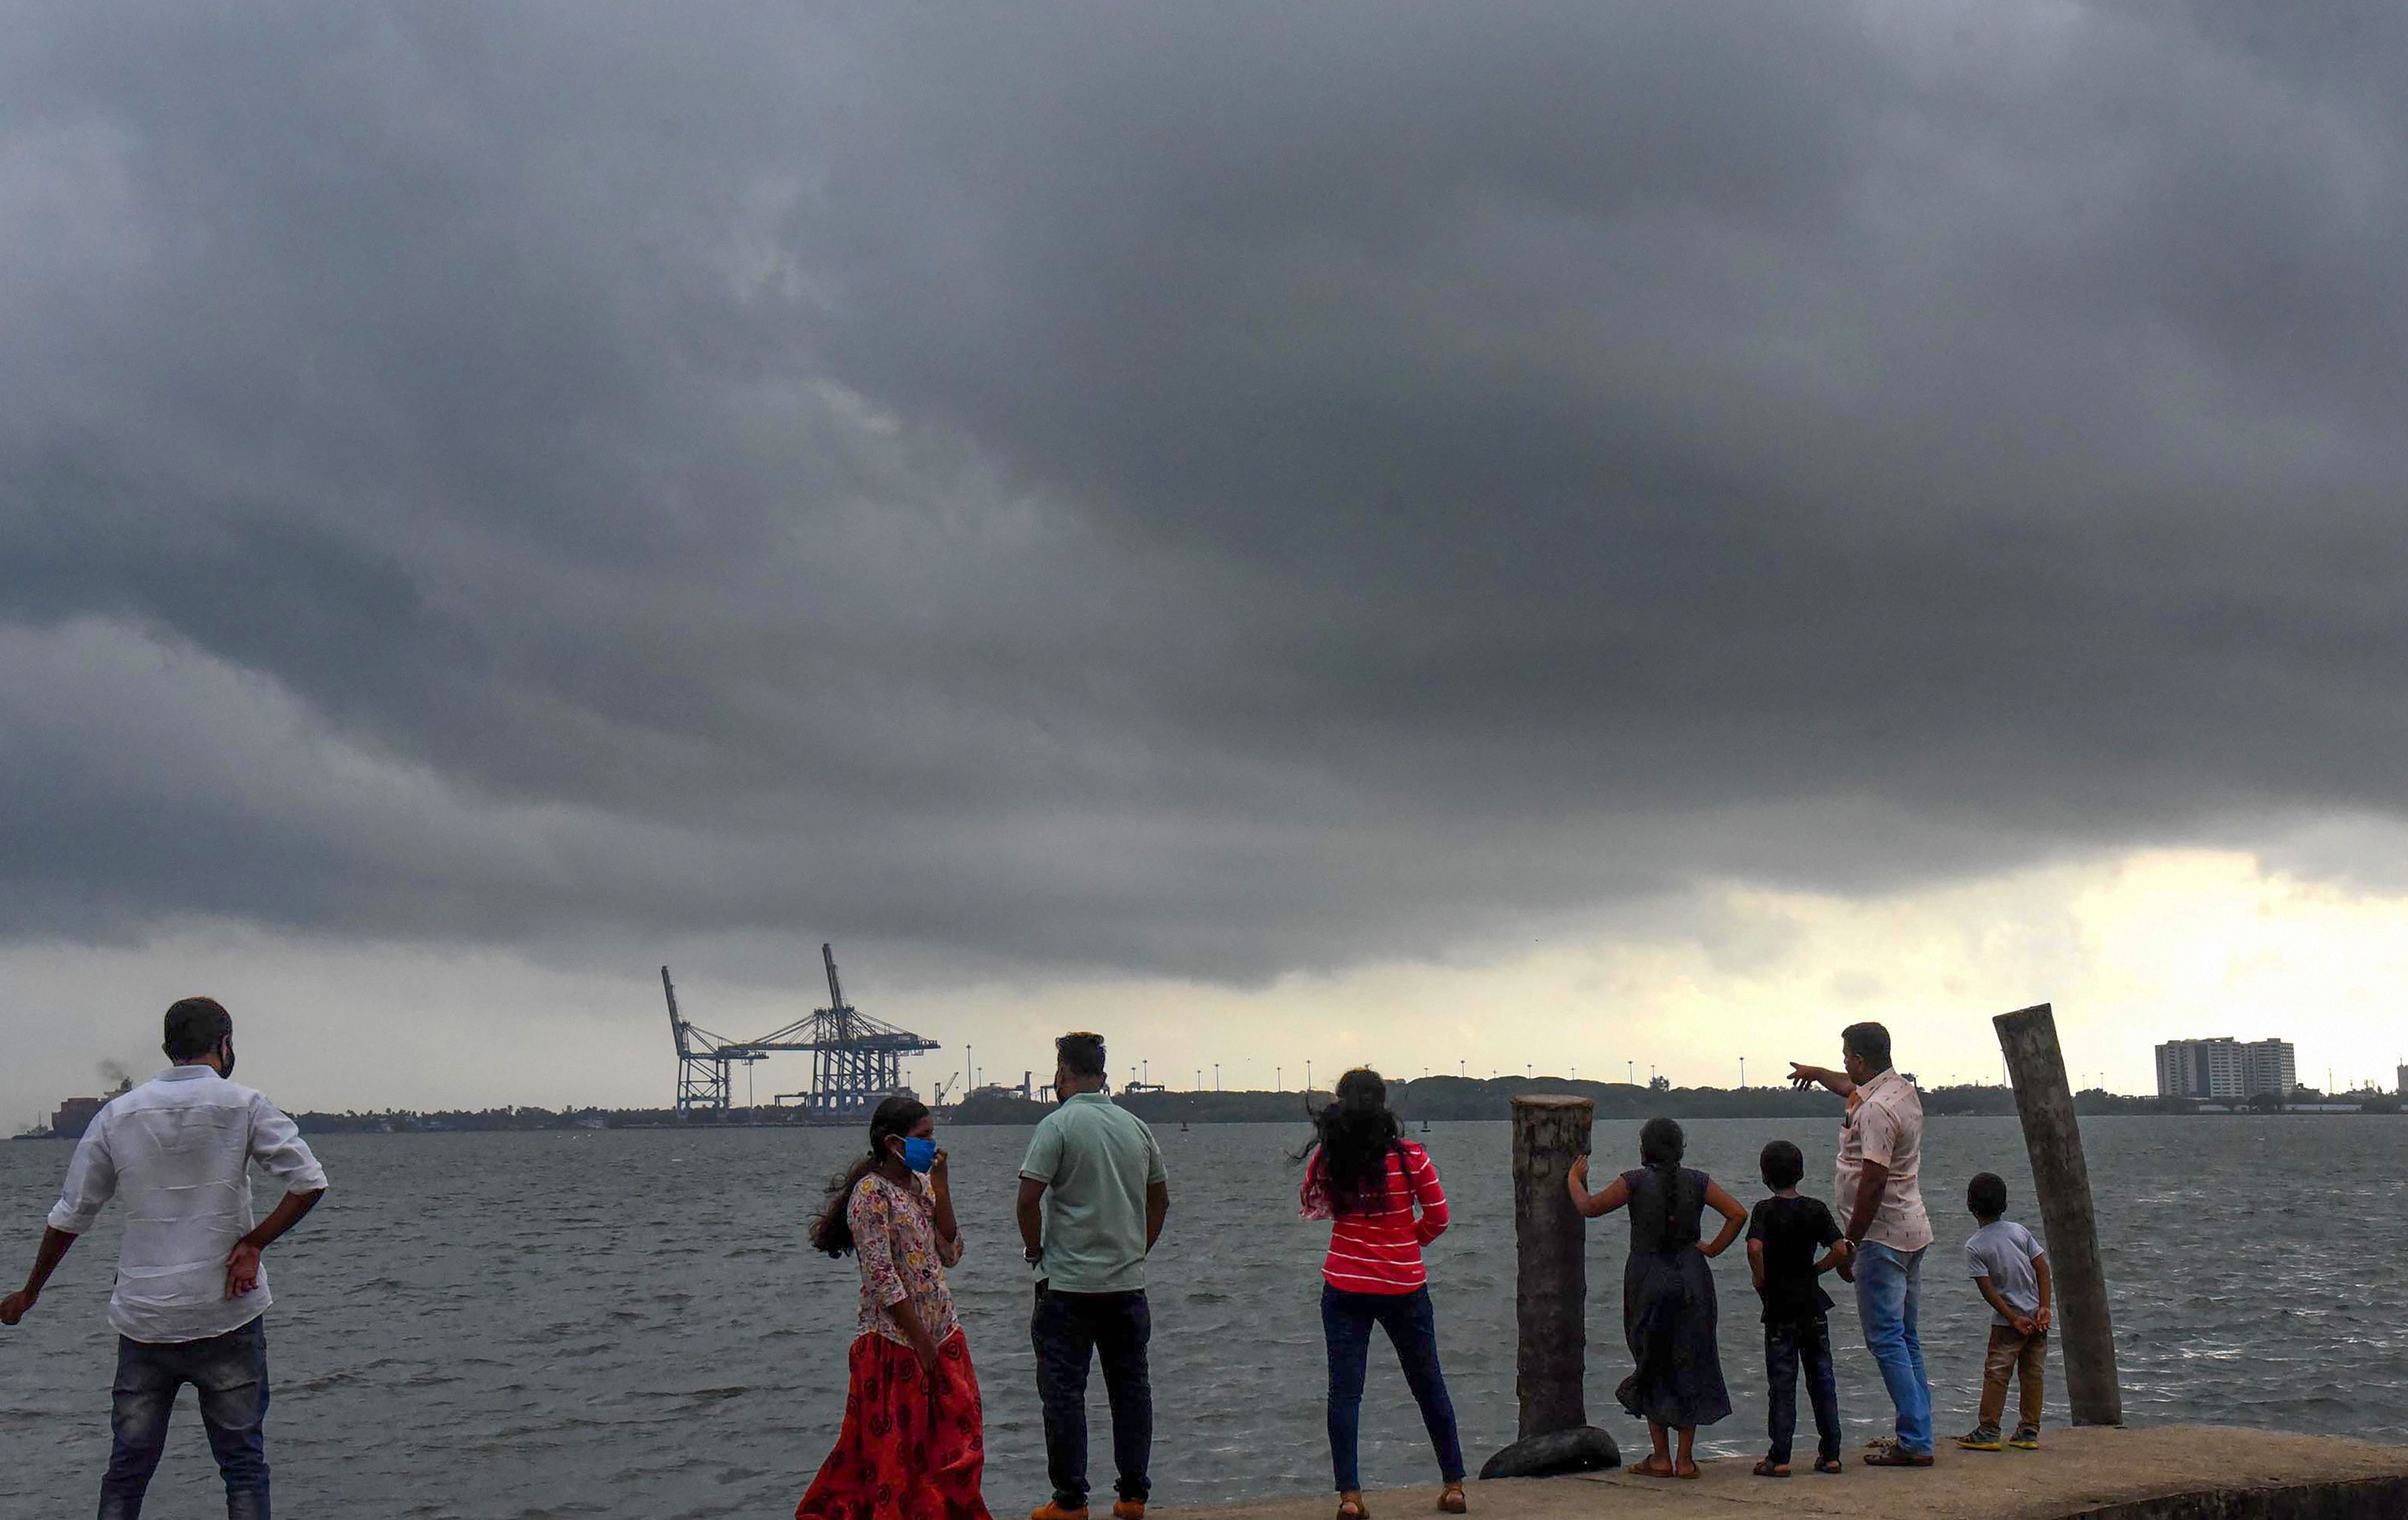 The southwest monsoon has arrived in Kerala before its onset schedule, private agency Skymet Weather announced on Saturday, but India's official forecaster IMD said conditions are not yet ripe for the declaration. (PTI)